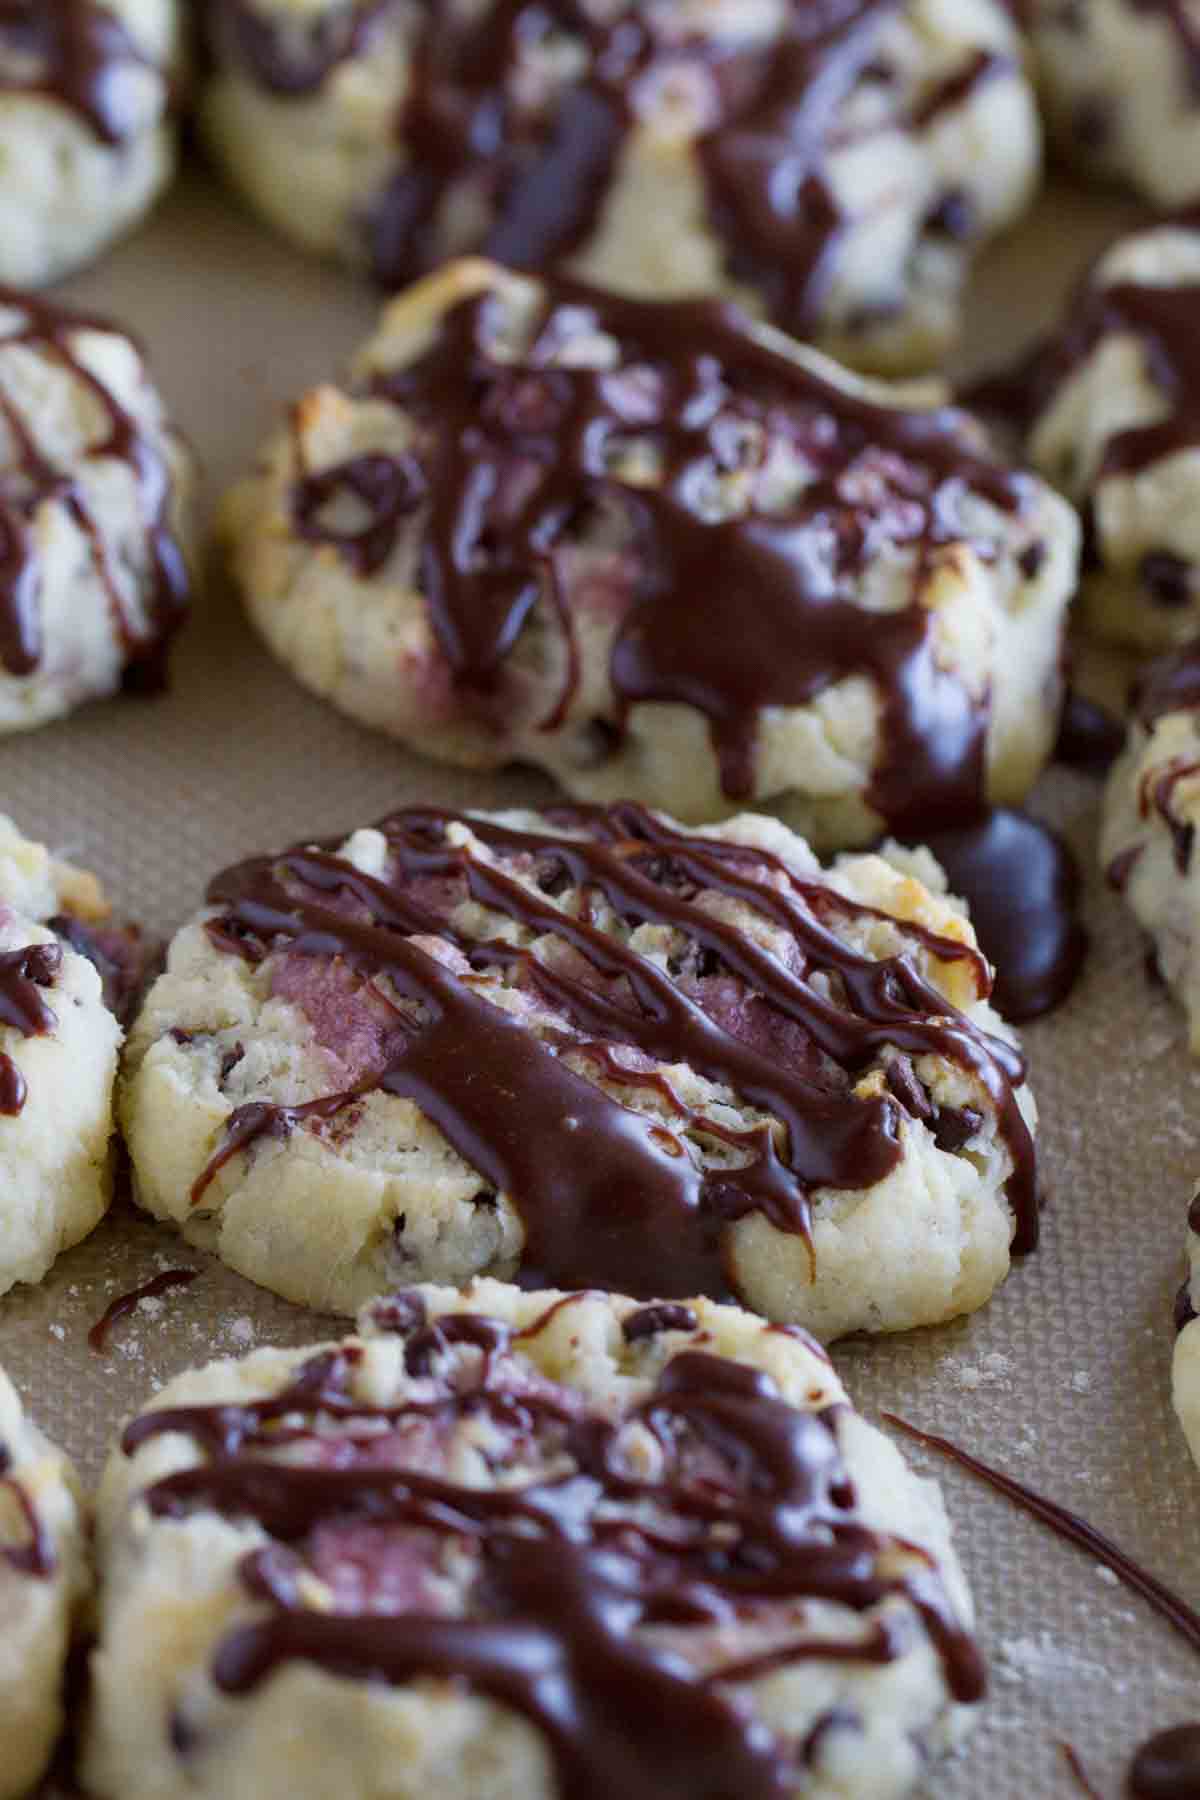 chocolate chip biscuits with raspberry cream with a chocolate drizzle